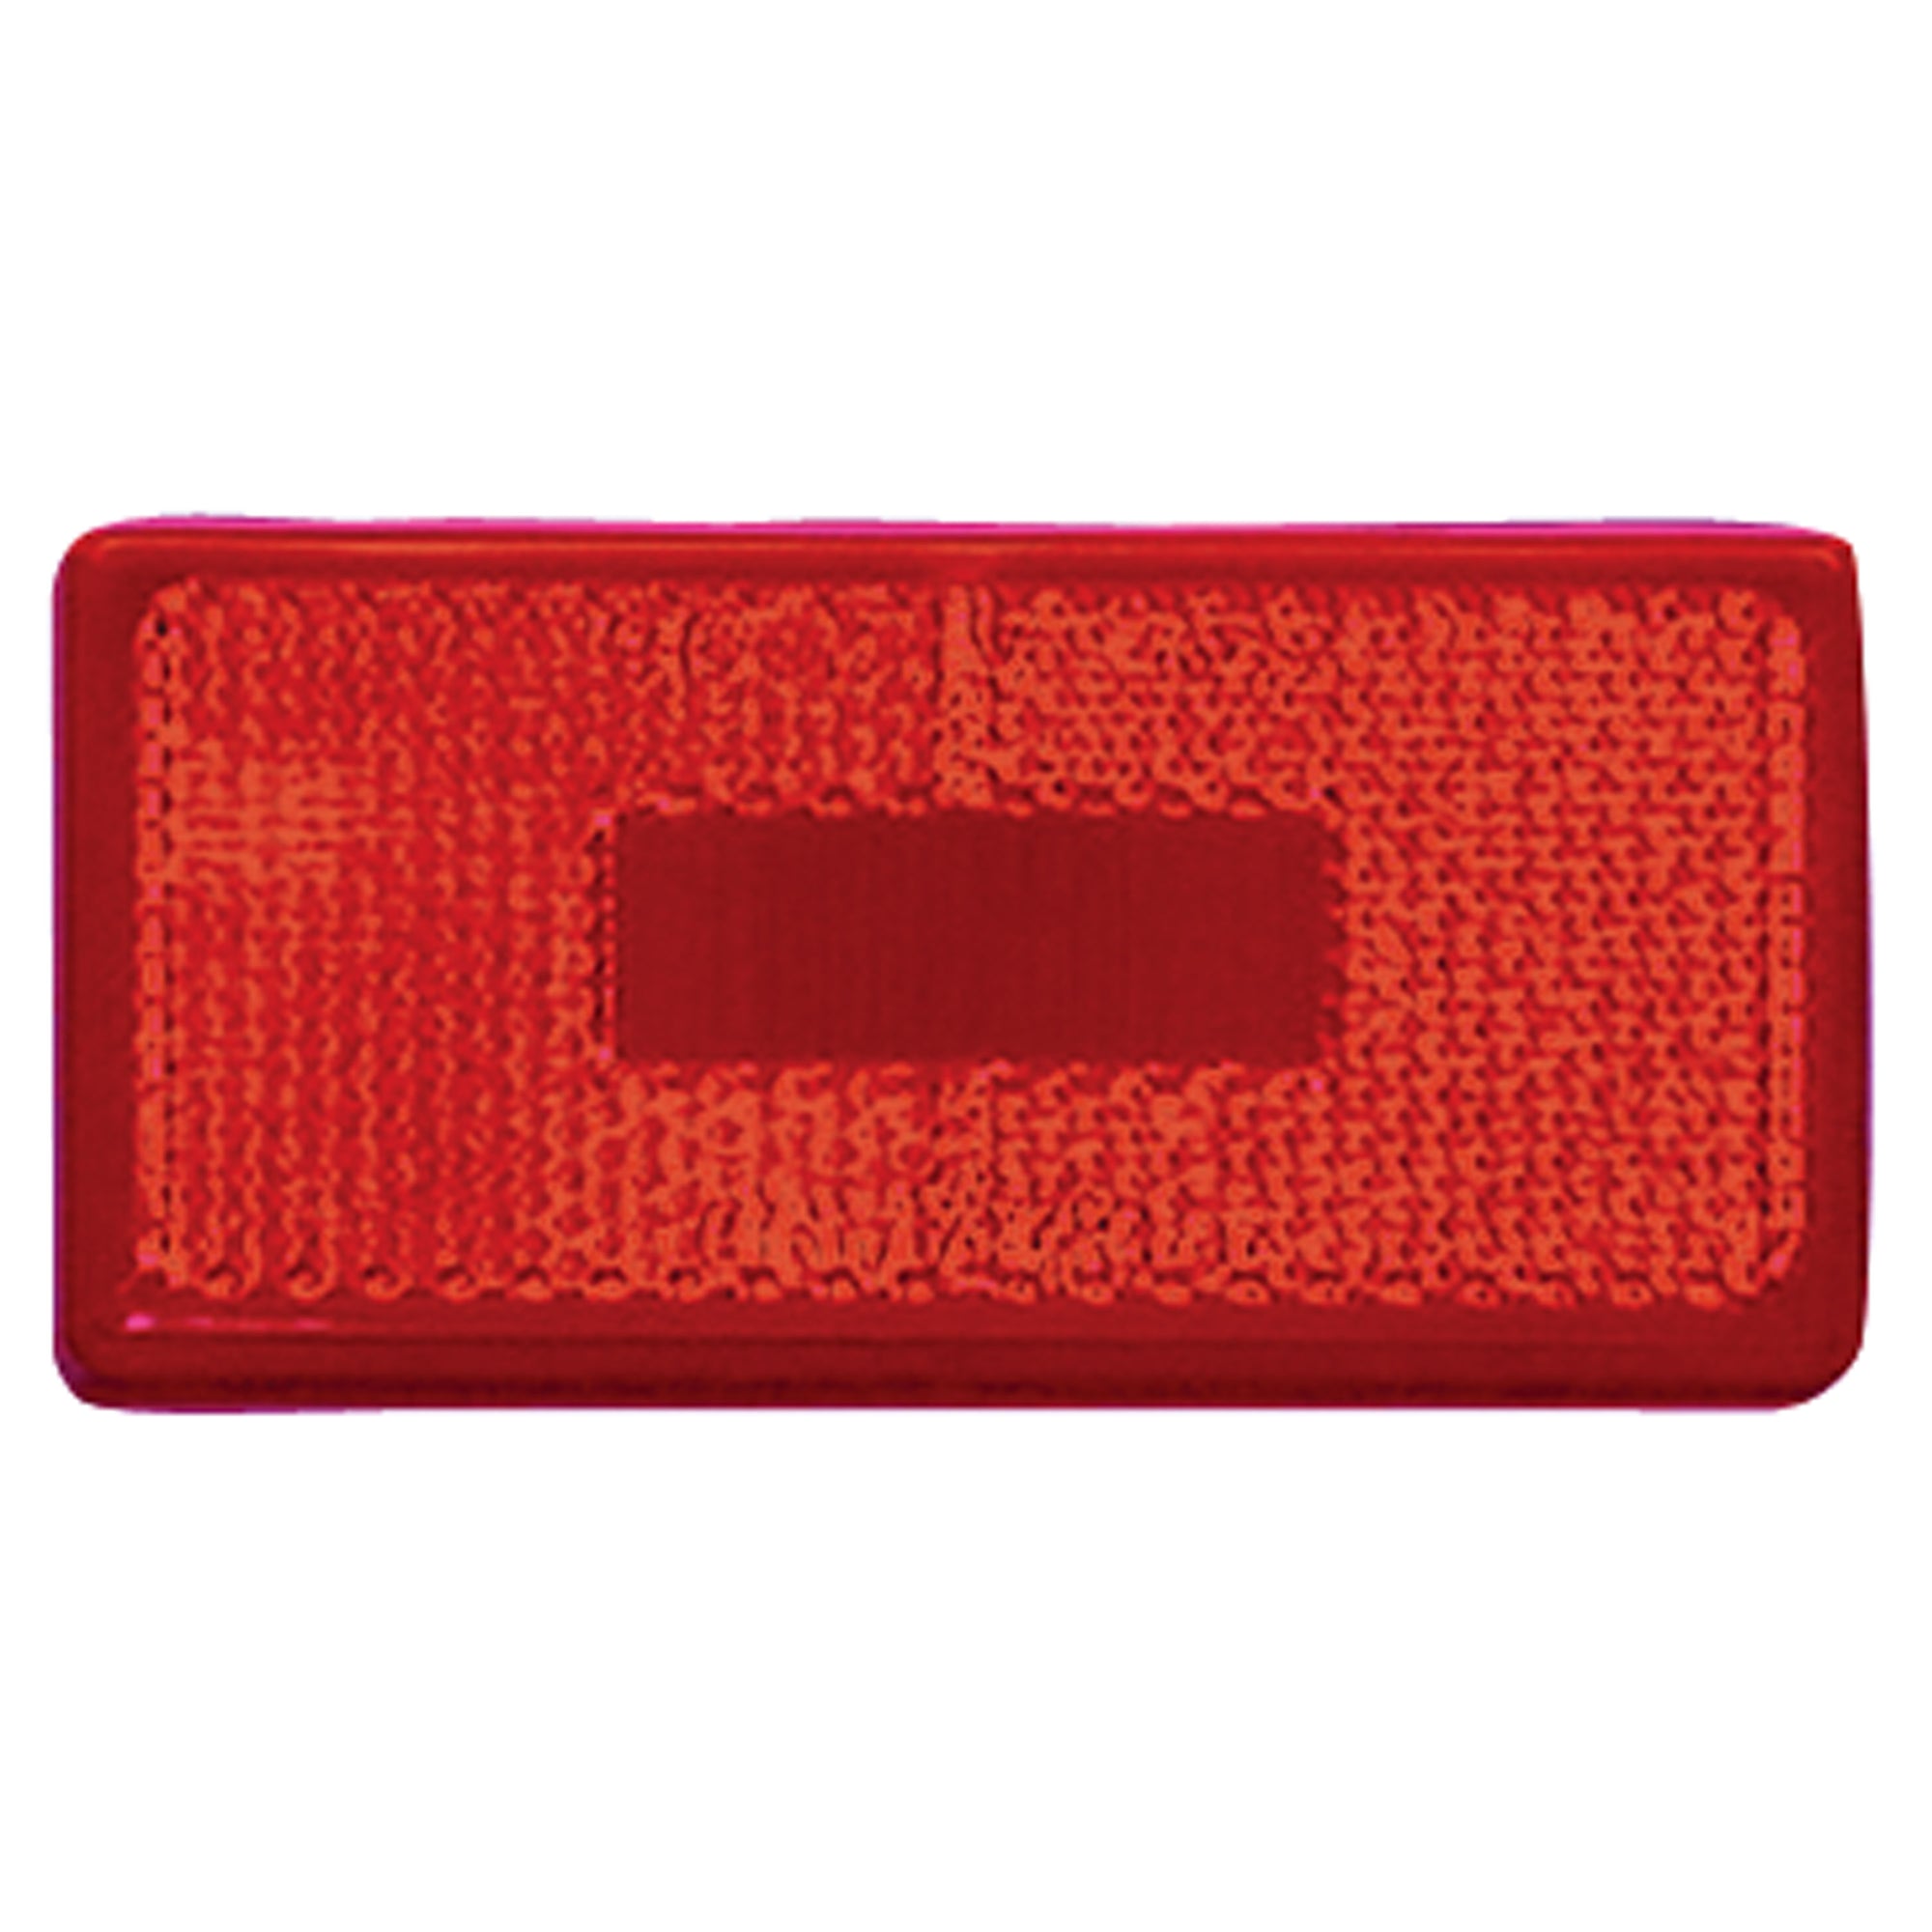 Fasteners Unlimited 003-56 Command Electronics Clearance Light - Red Light